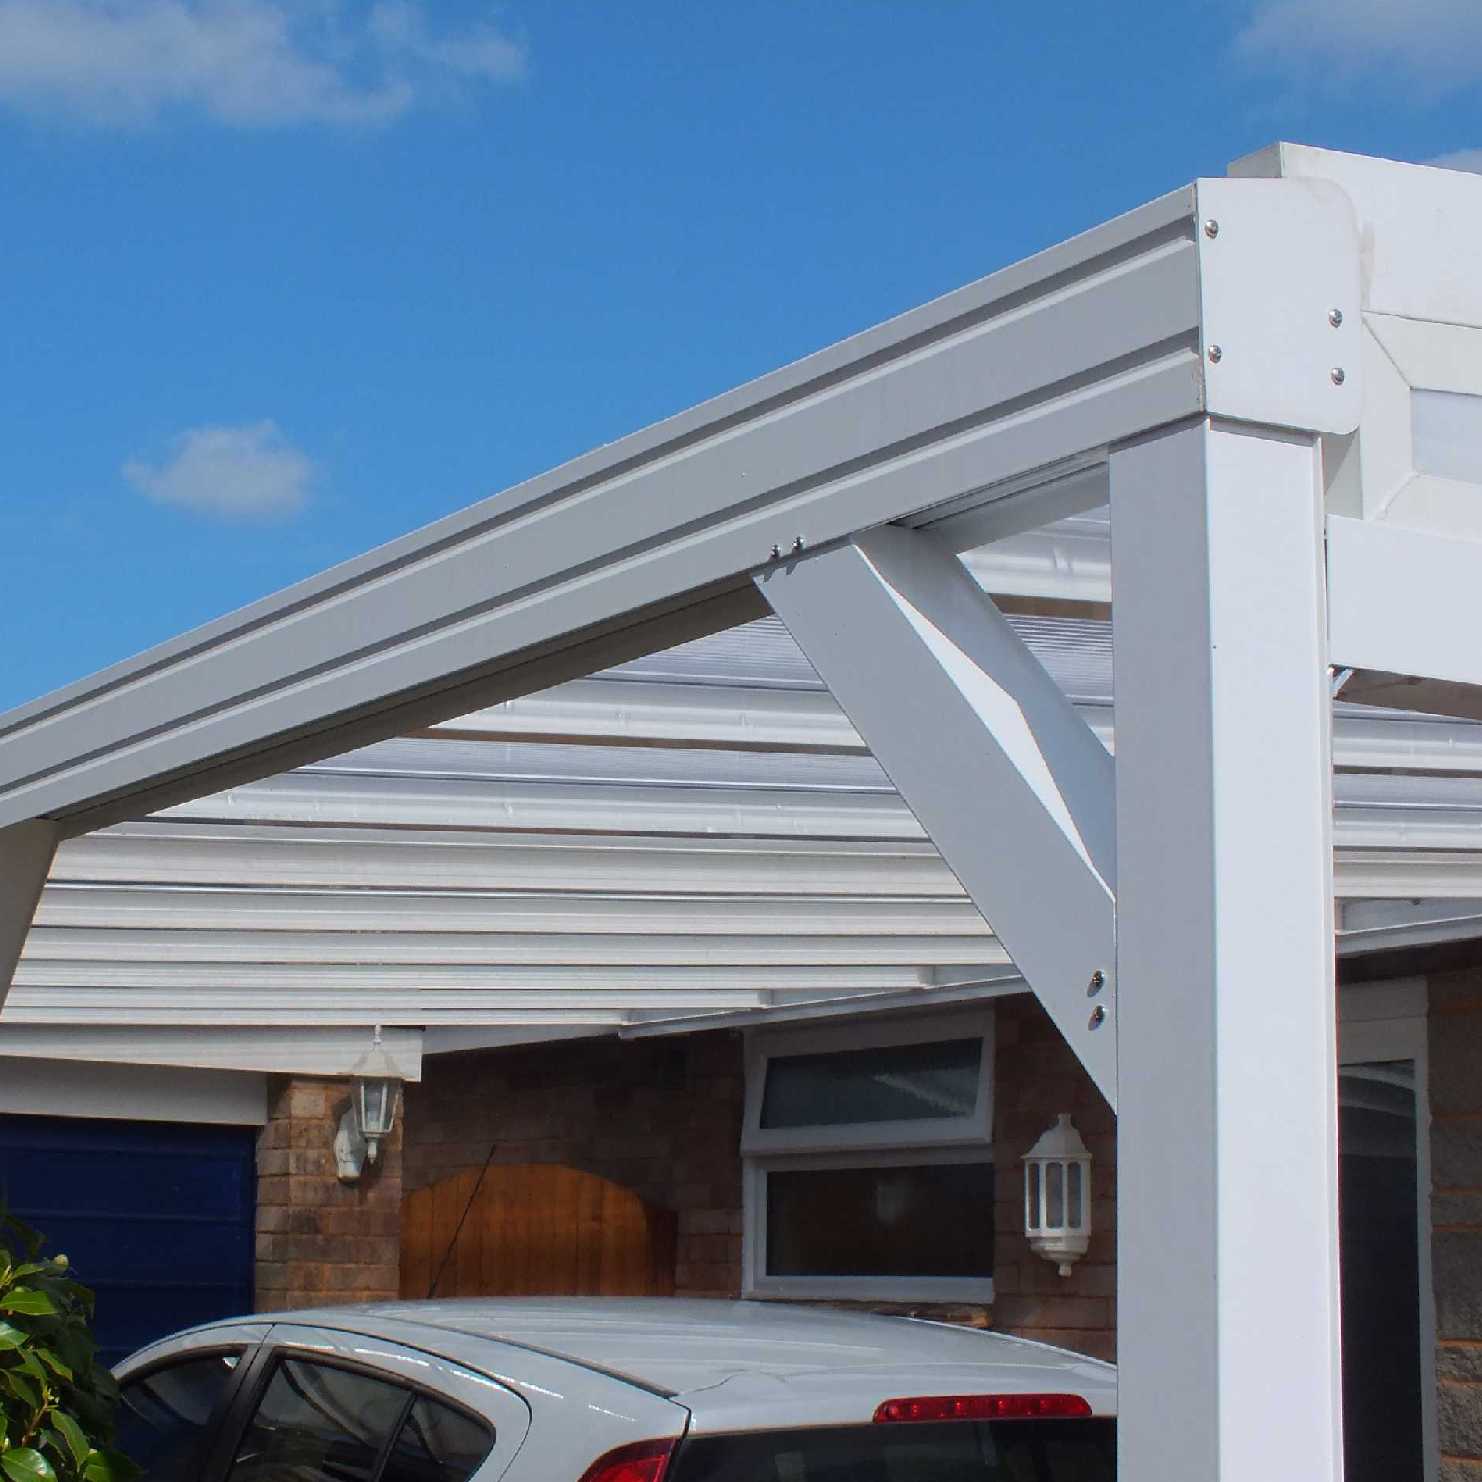 Buy Omega Smart Lean-To Canopy, White with 16mm Polycarbonate Glazing - 10.6m (W) x 2.0m (P), (5) Supporting Posts online today